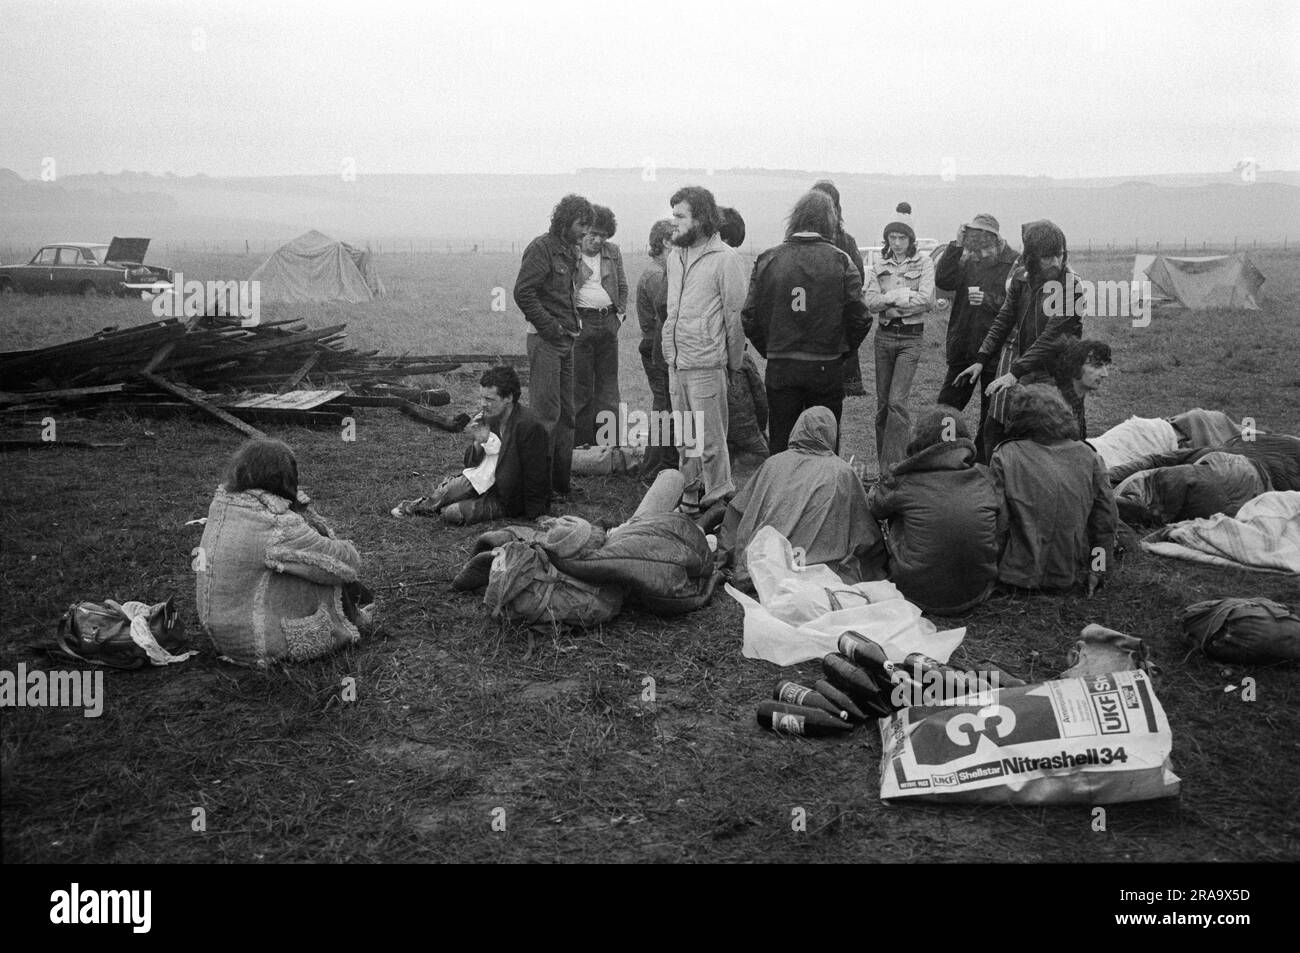 Stonehenge Free Festival at the summer solstice, June 21st Summer Solstice. Festival goers up all night, wet and cold one early morning. Wiltshire, England circa June 1976. 1970s UK HOMER SYKES Stock Photo